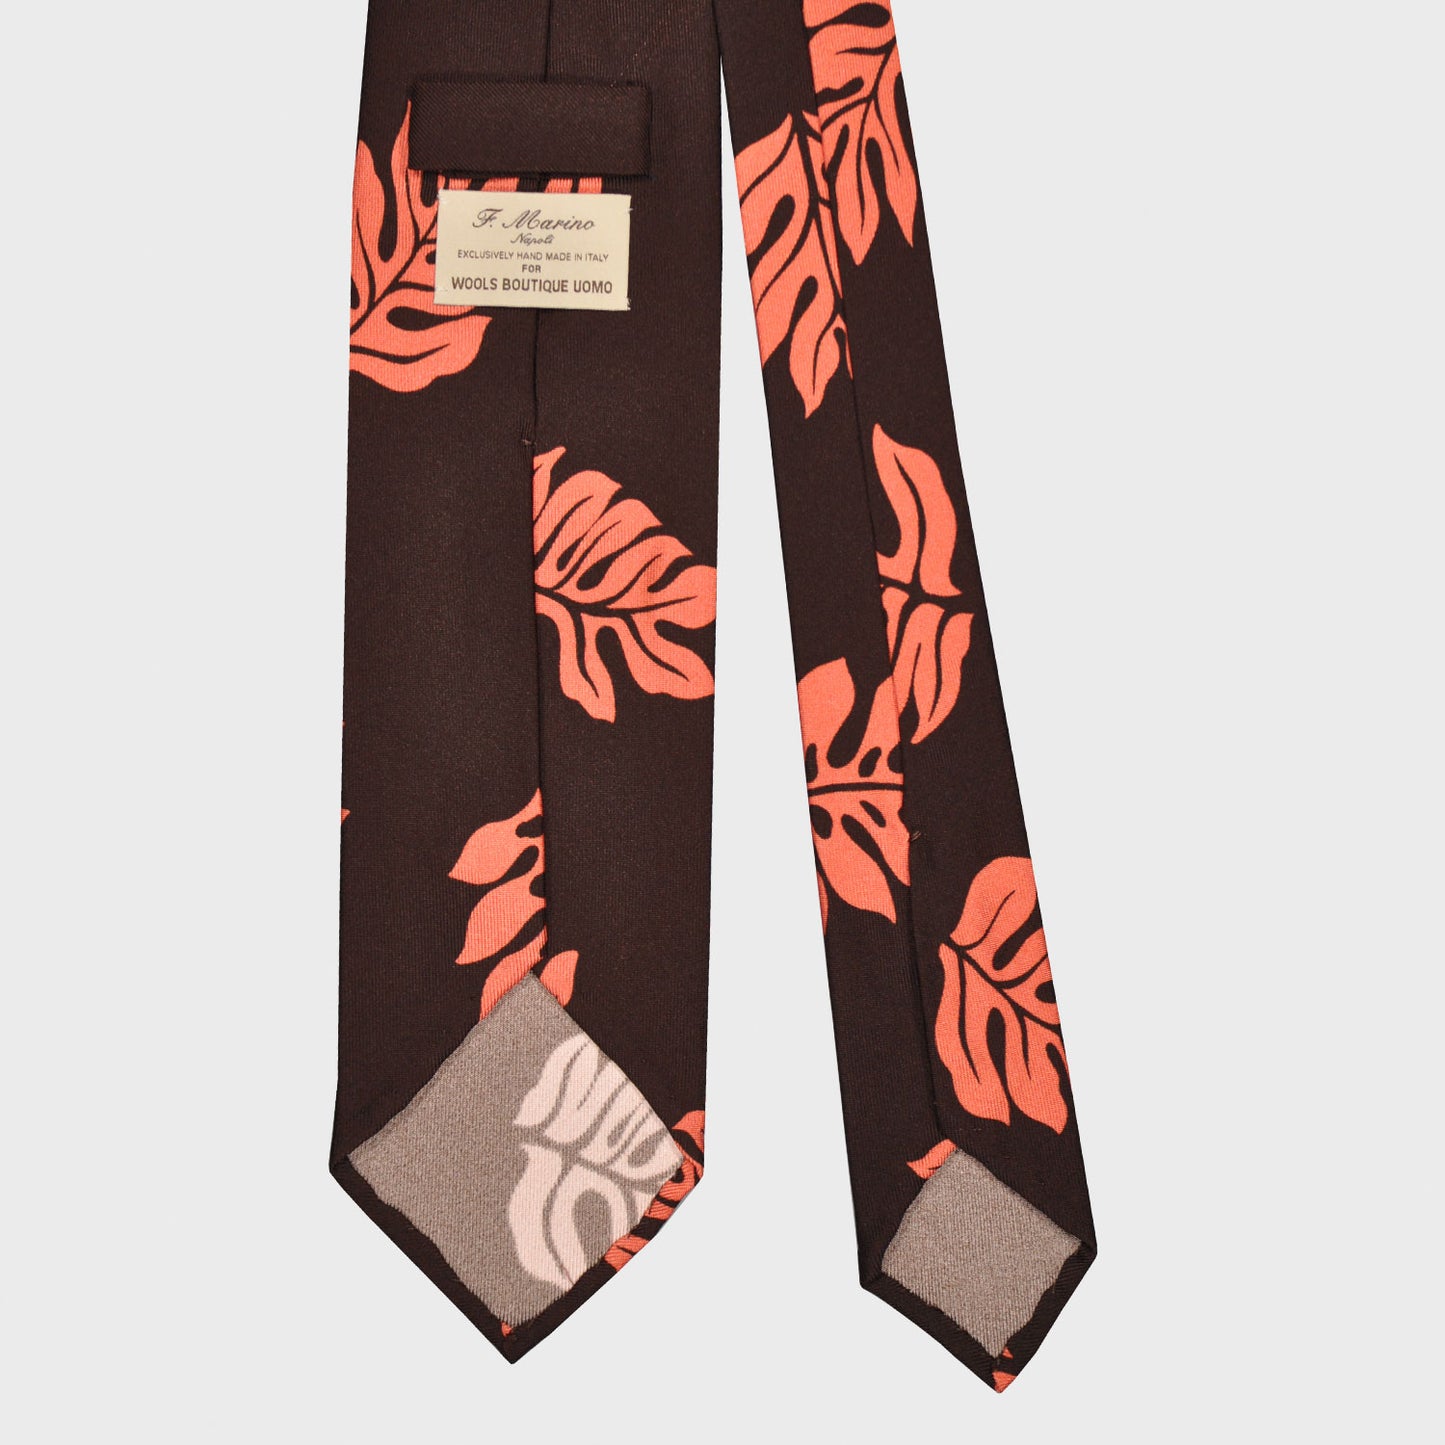 Load image into Gallery viewer, F.Marino Silk Tie 3 Folds Tropical Leaves Pink-Wools Boutique Uomo
